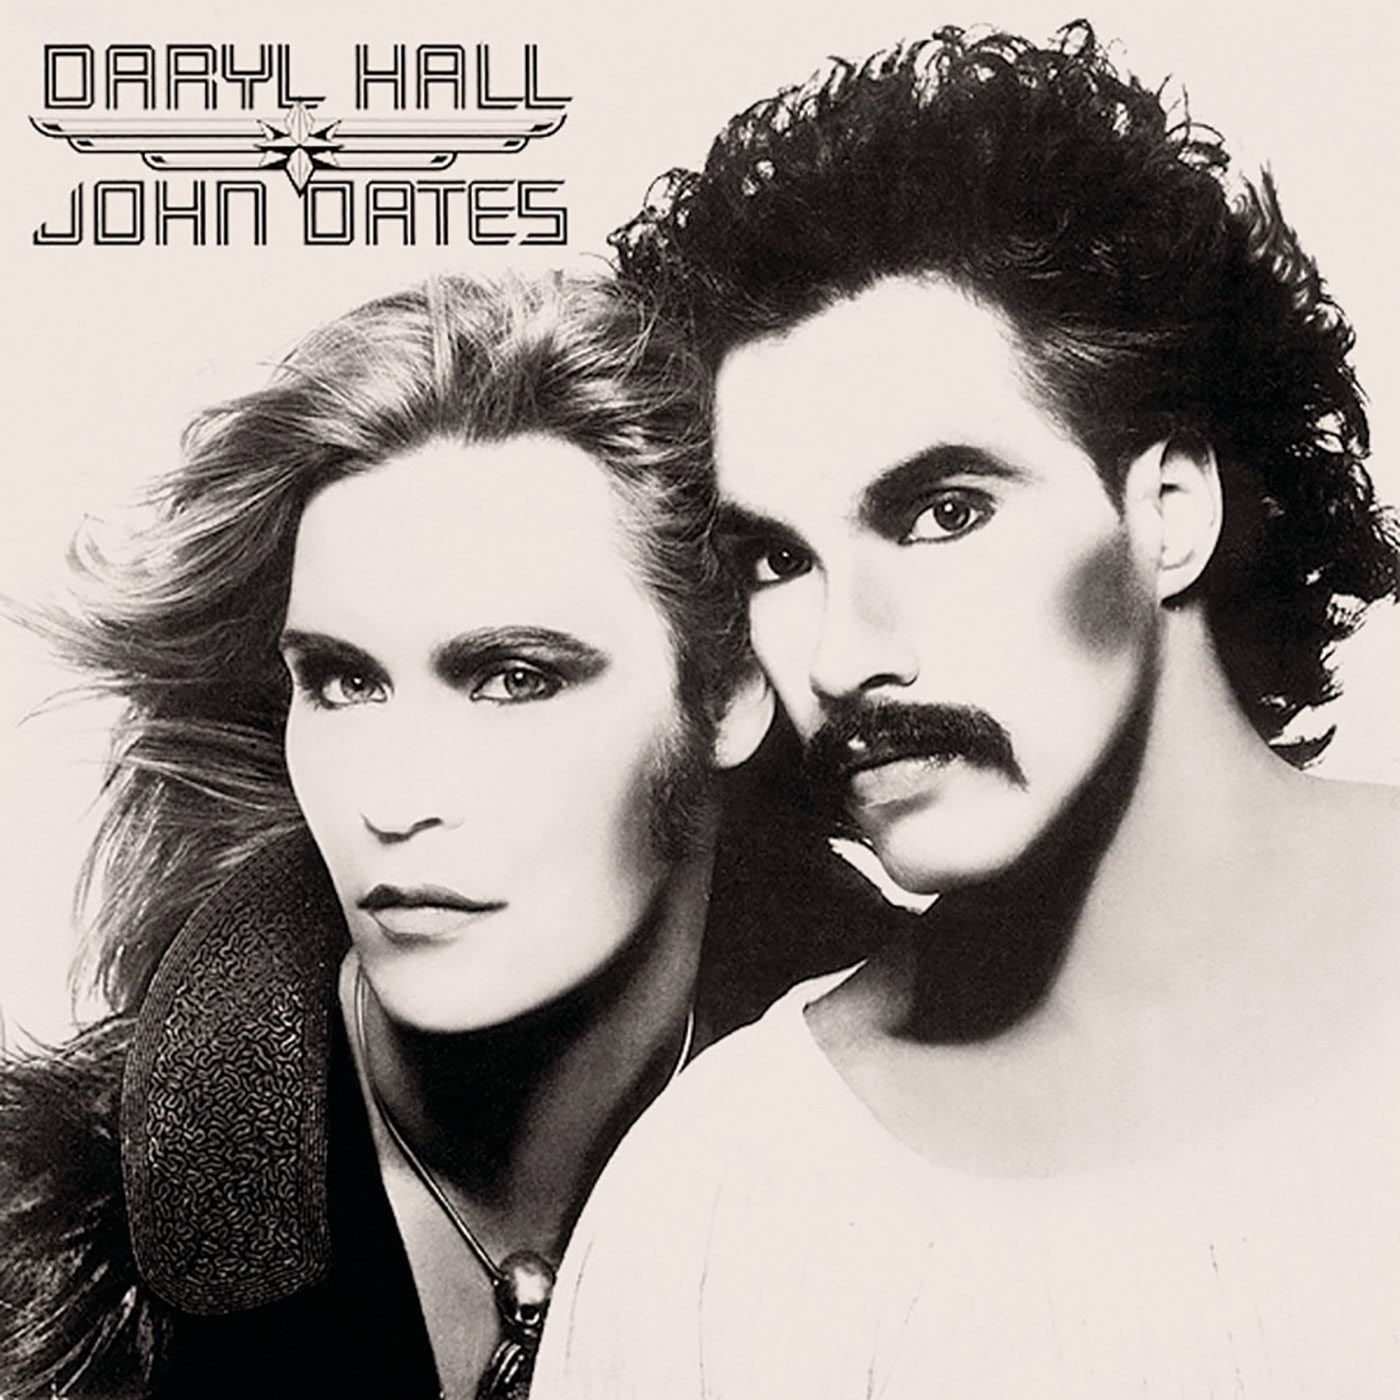 Art for Sara Smile by Daryl Hall & John Oates